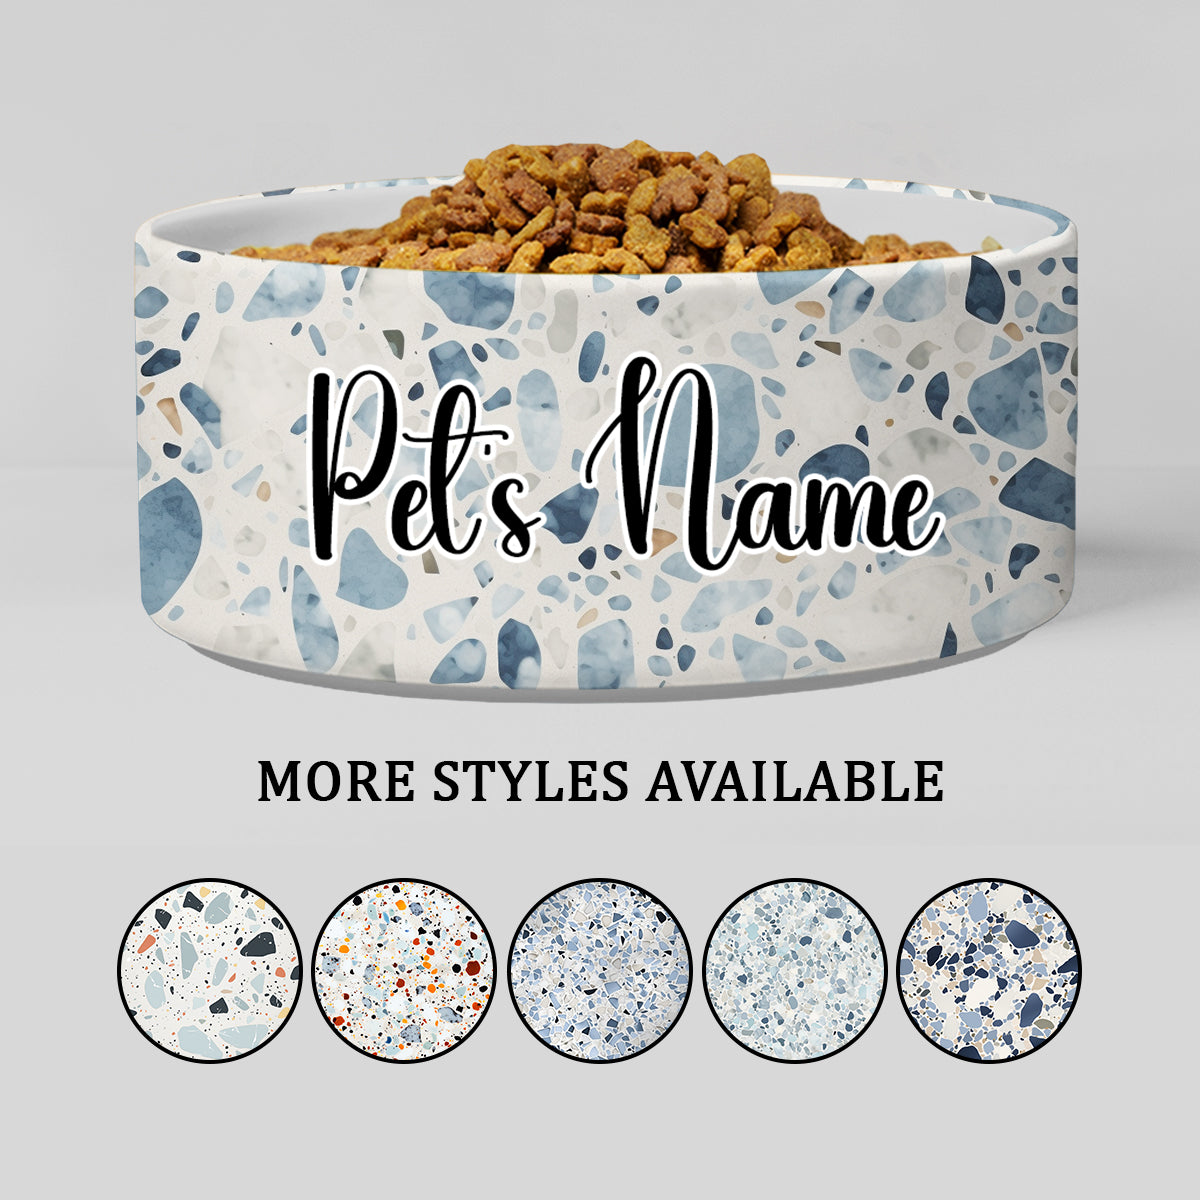 Personalized Dog Pet Cat Bowls, Boho Chic Terrazzo 02 Personalized Pet Bowls for Dogs and Cats, Eclectic Modern Spotted Dishes With Name, Ceramic Custom Cute Dog Bowls, Designer Large and Small Dog Cat Pet Bowls Dish, Gift for Pet